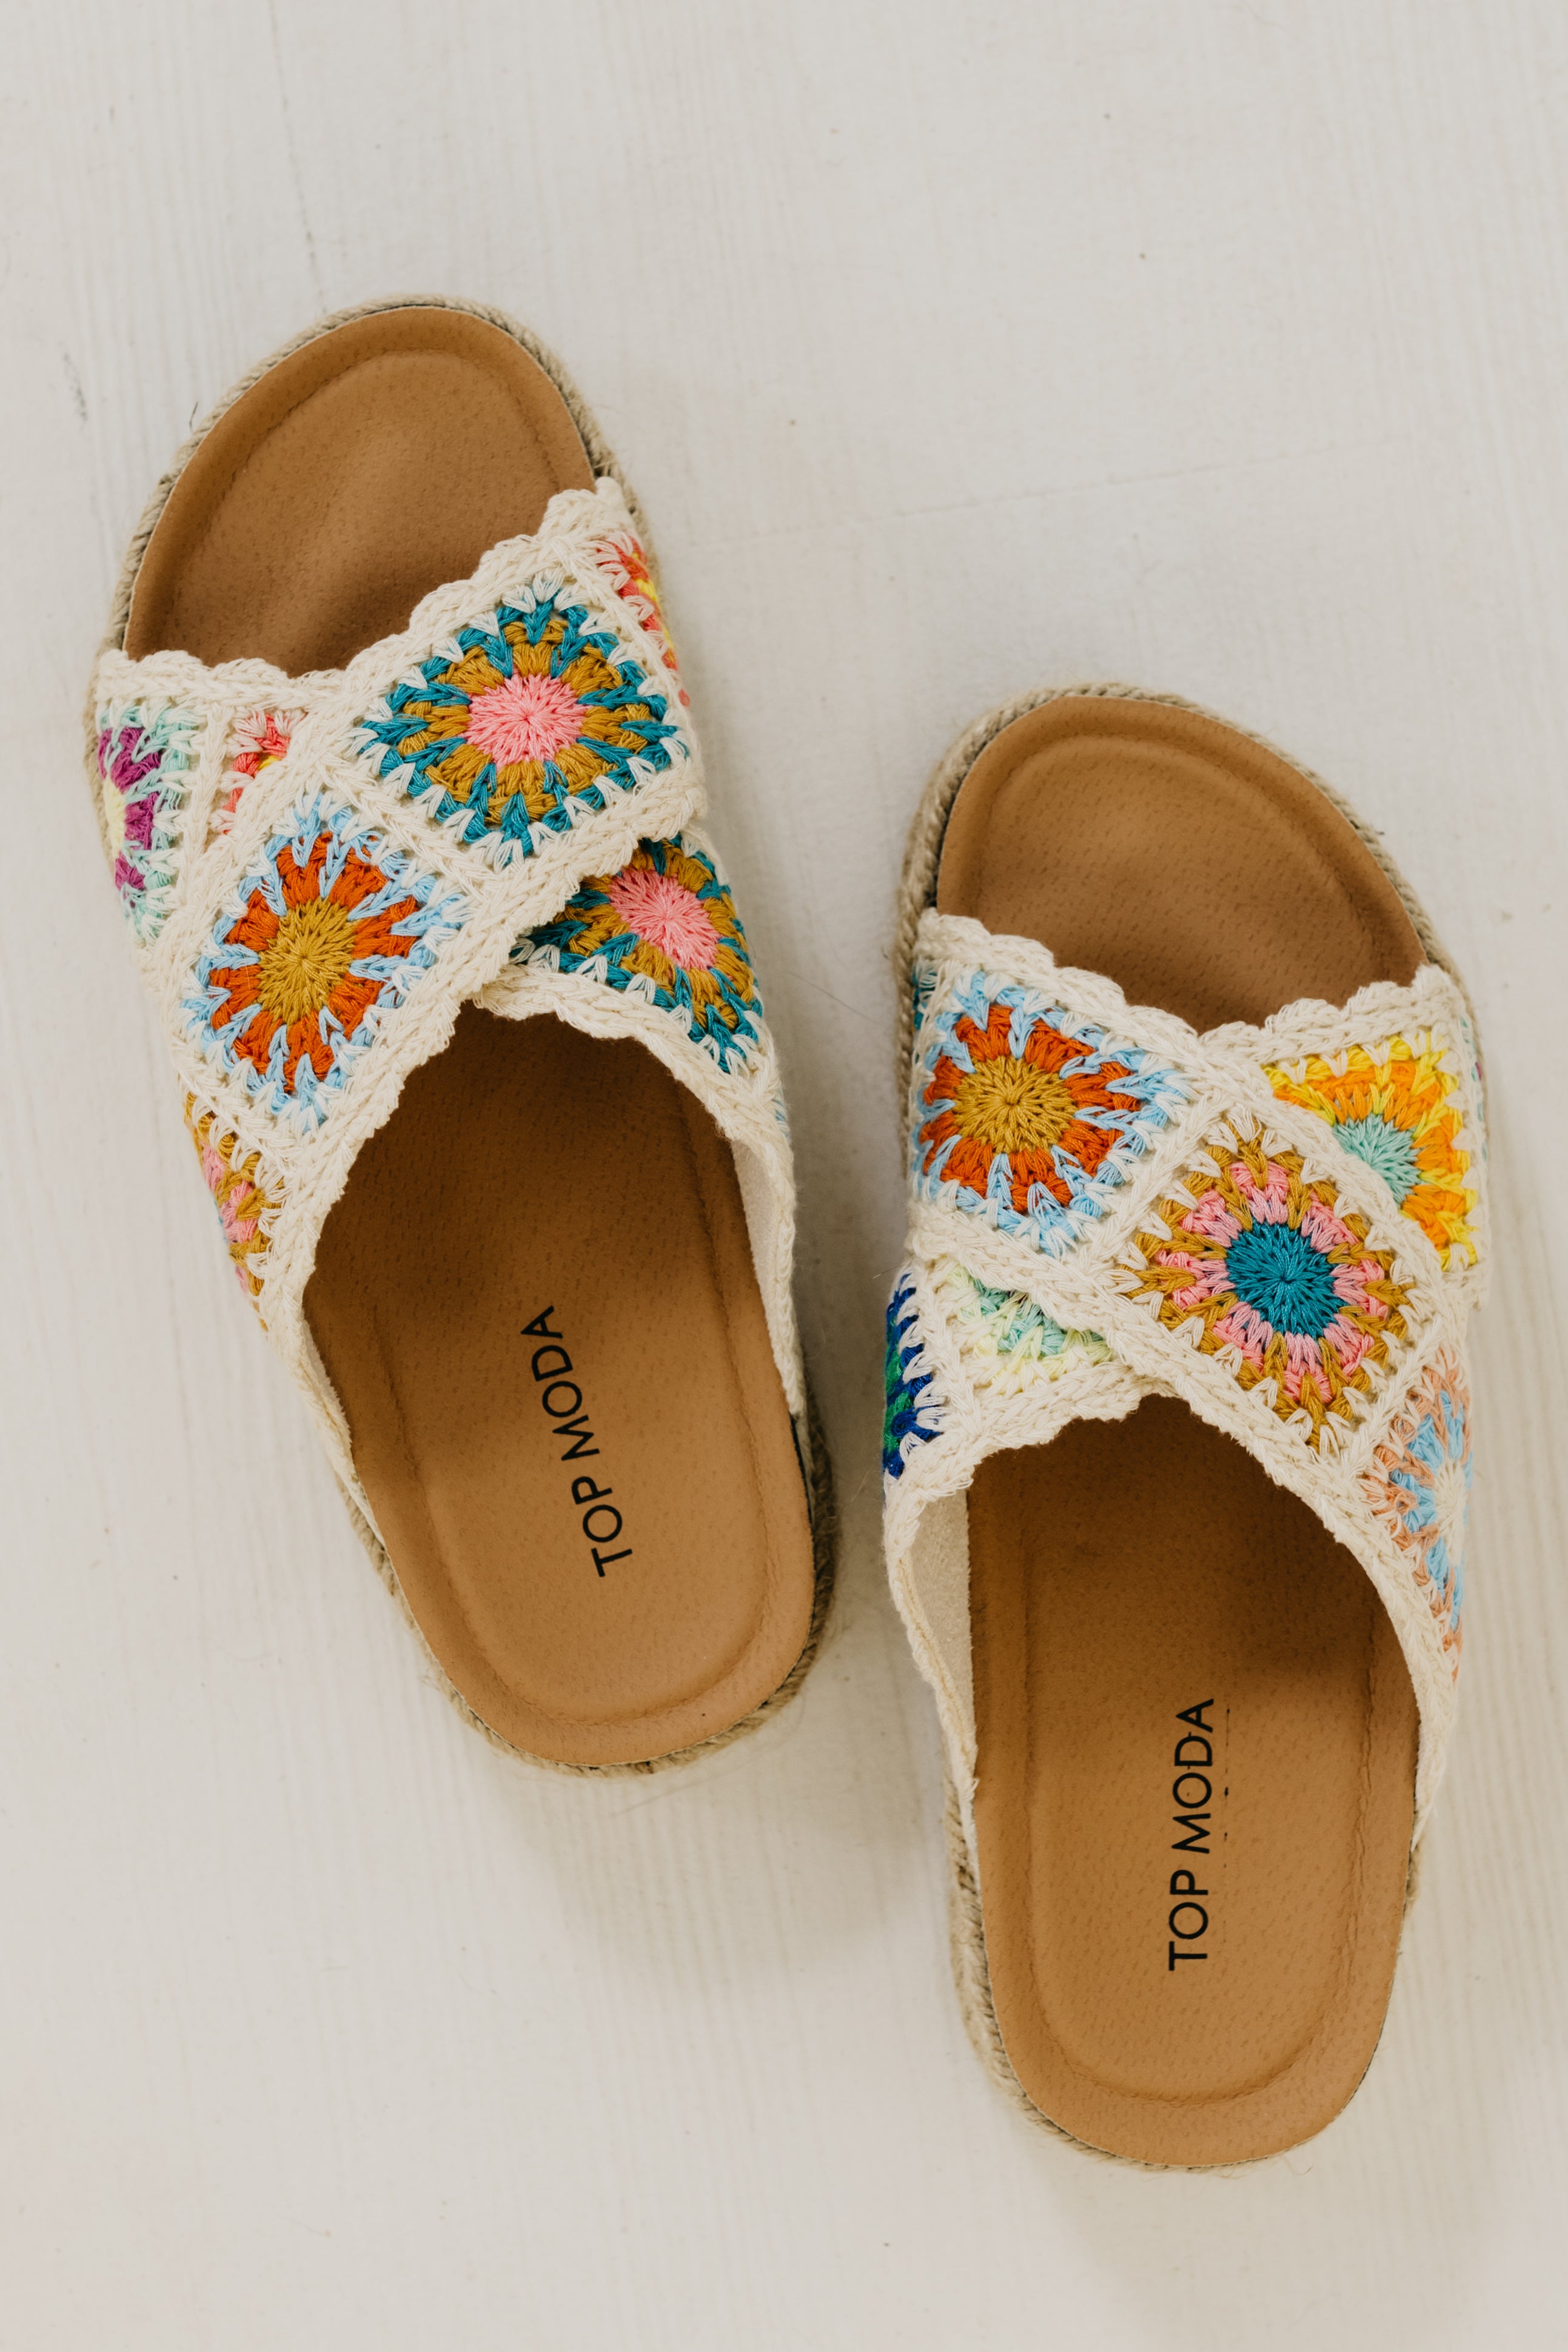 The Athens Espadrille Embroidered Sandal